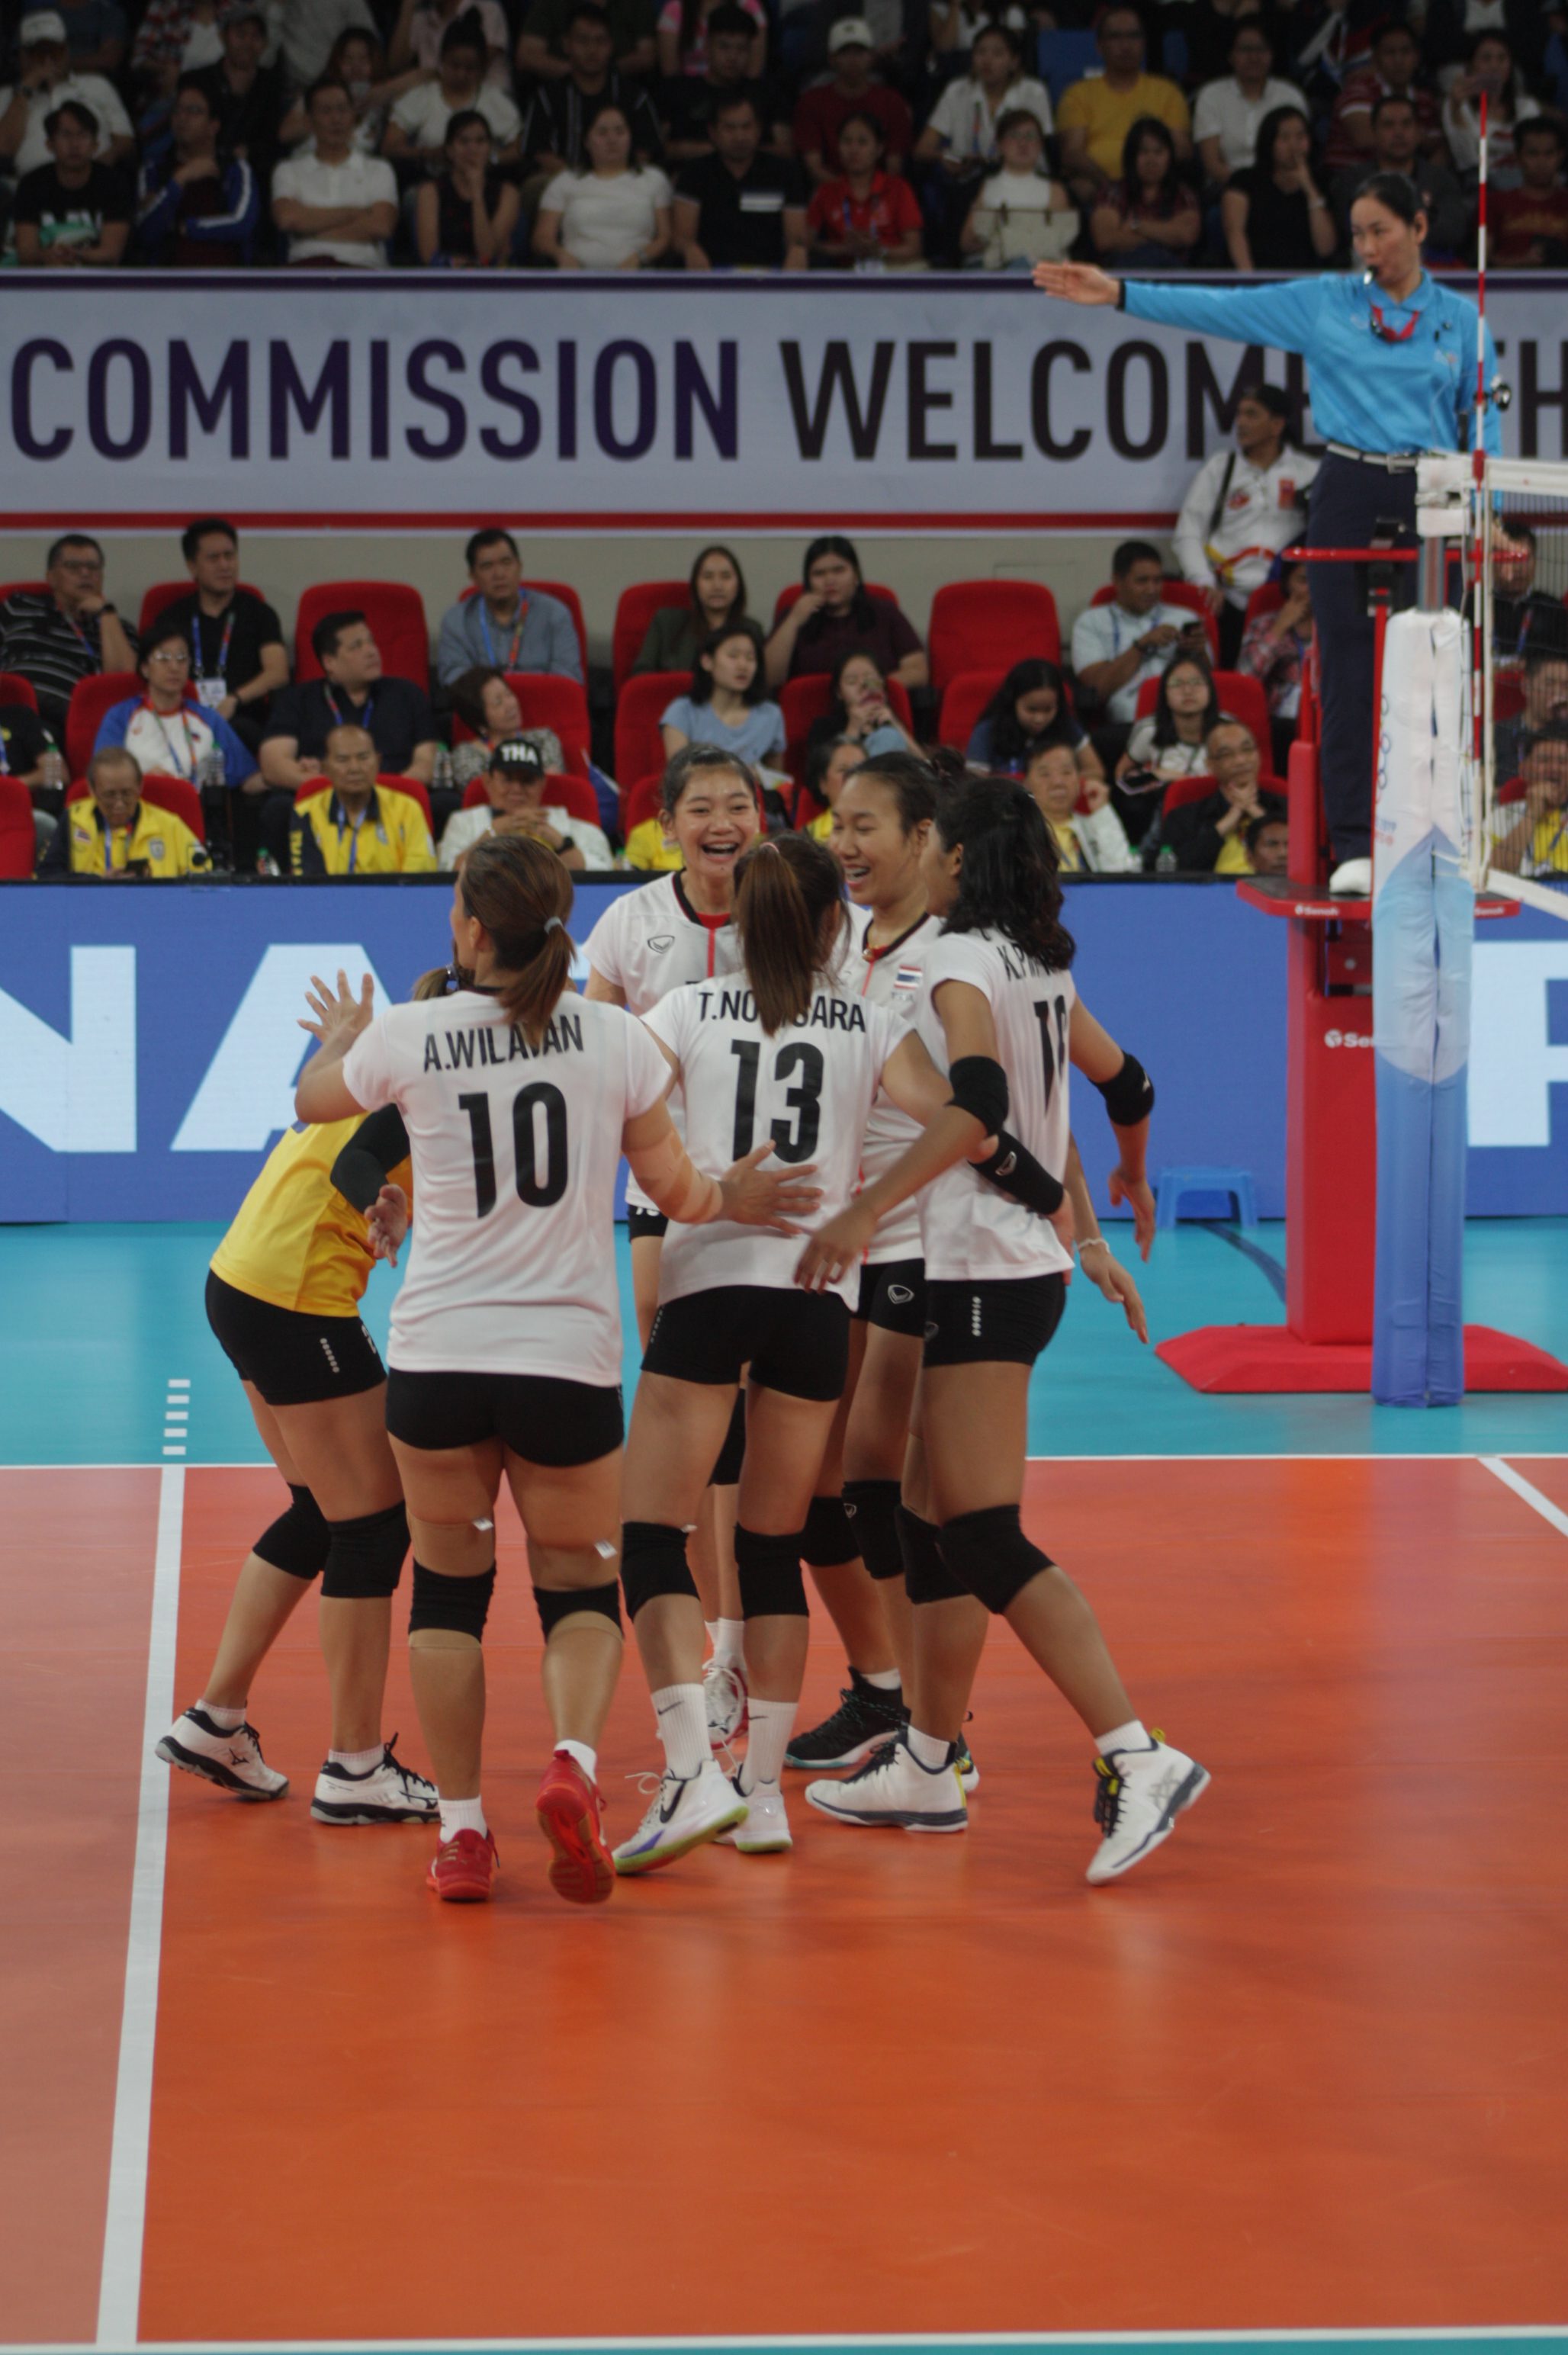 THAILAND AND VIETNAM TO RENEW RIVALRY IN WOMEN’S SHOWDOWN OF 30TH SEA GAMES